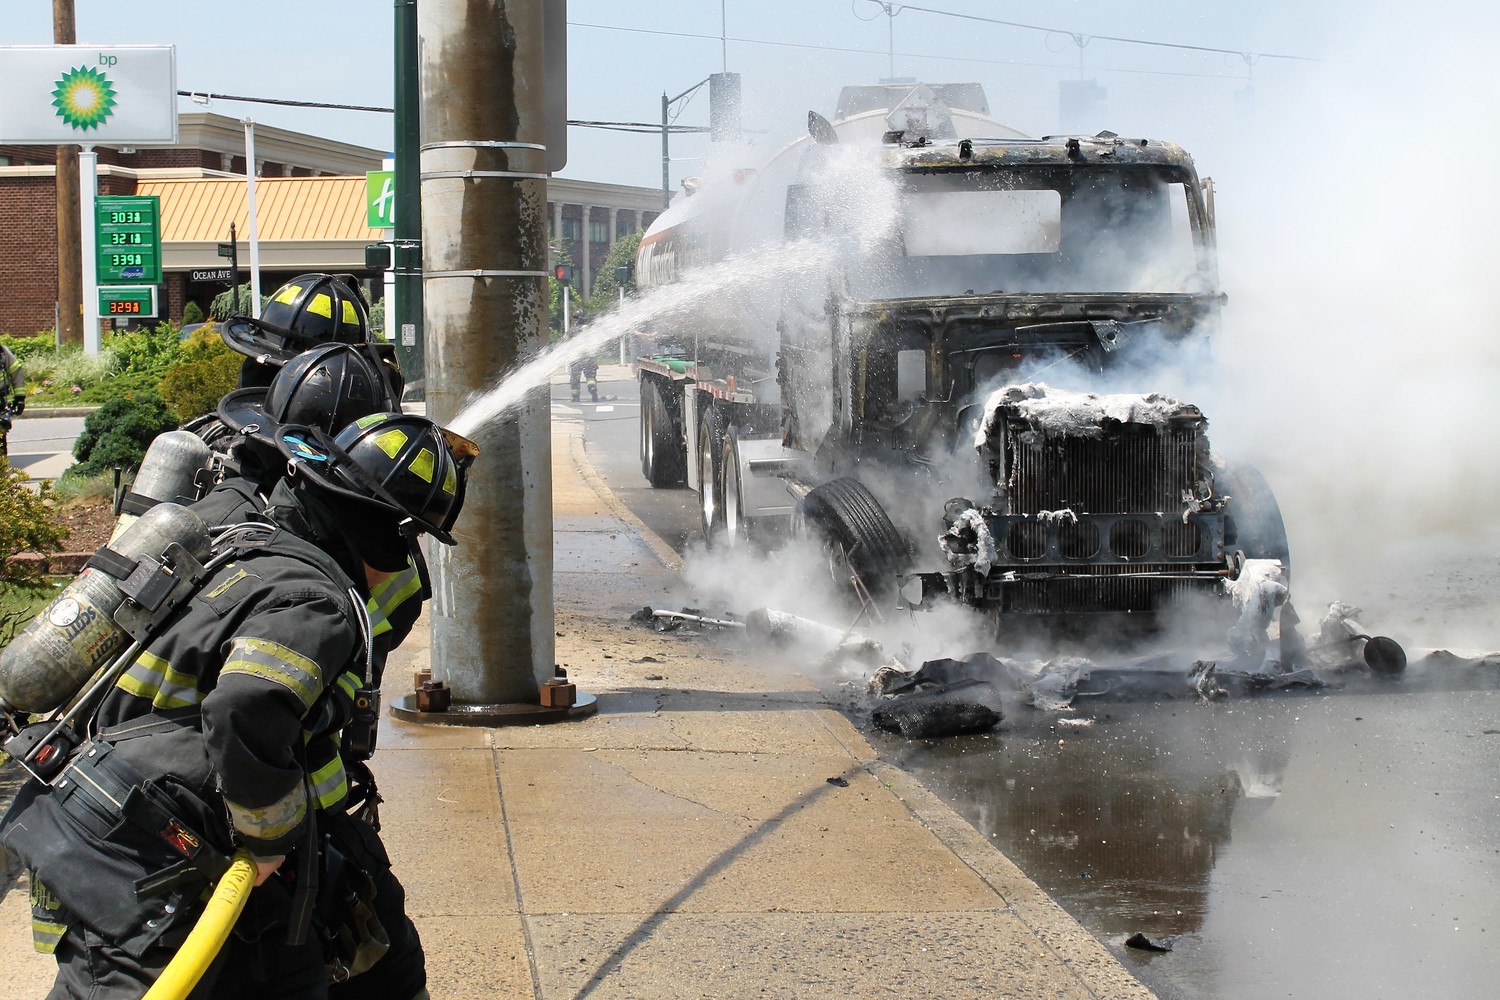 At around noon on Tuesday, a tanker truck caught fire on Tuesday morning at Sunrise Highway and Ocean Avenue.